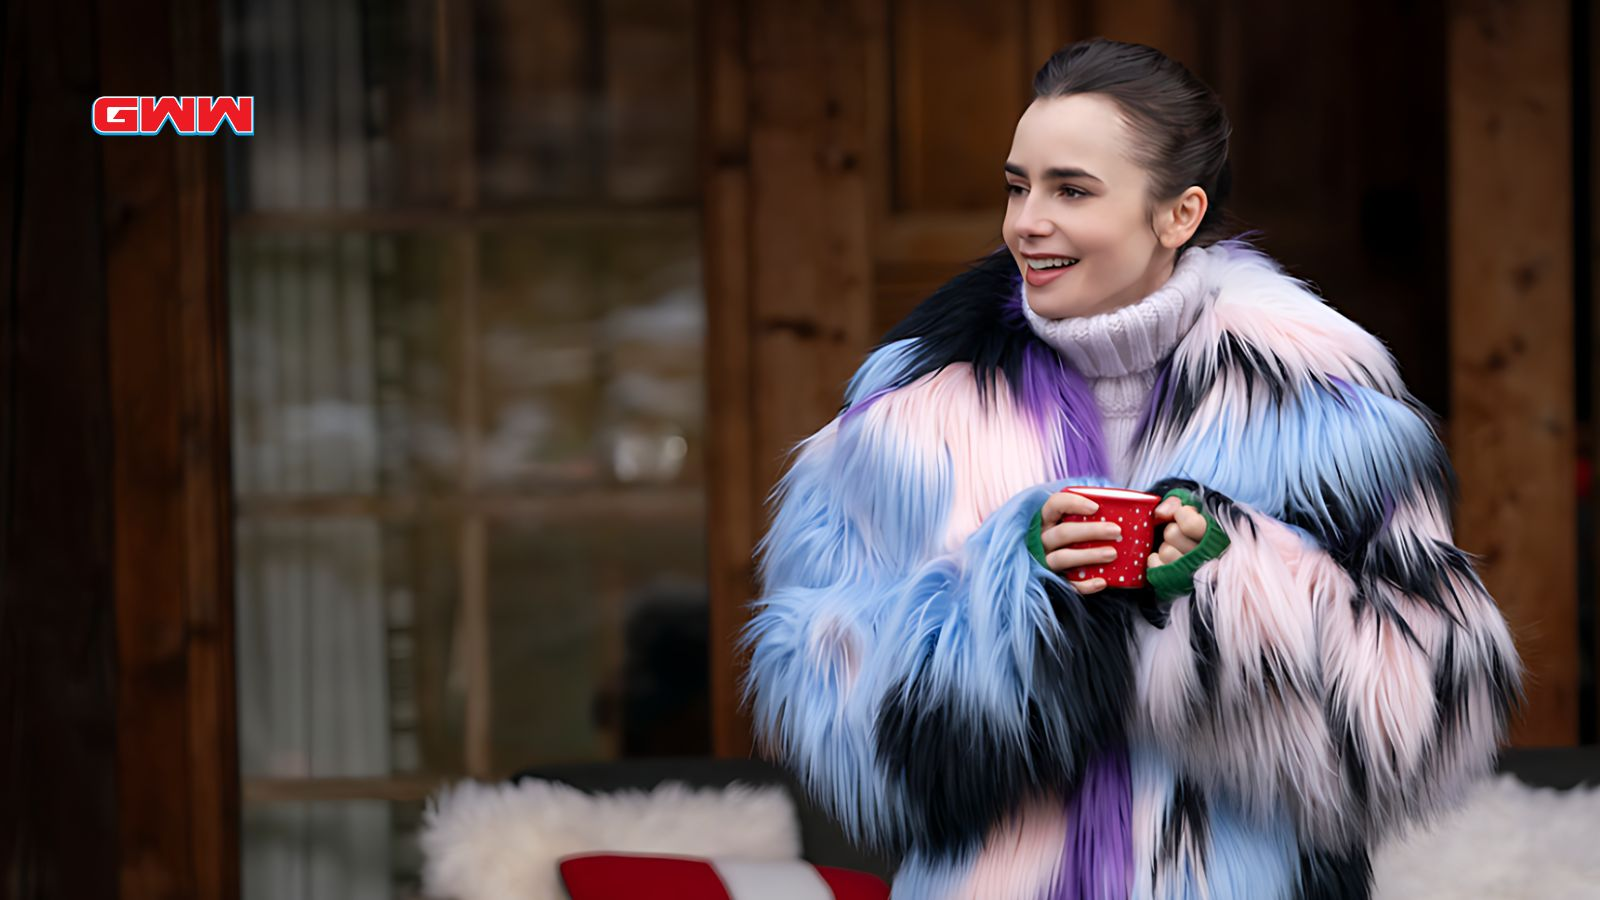 Emily in colorful fur coat holding a red mug outside.